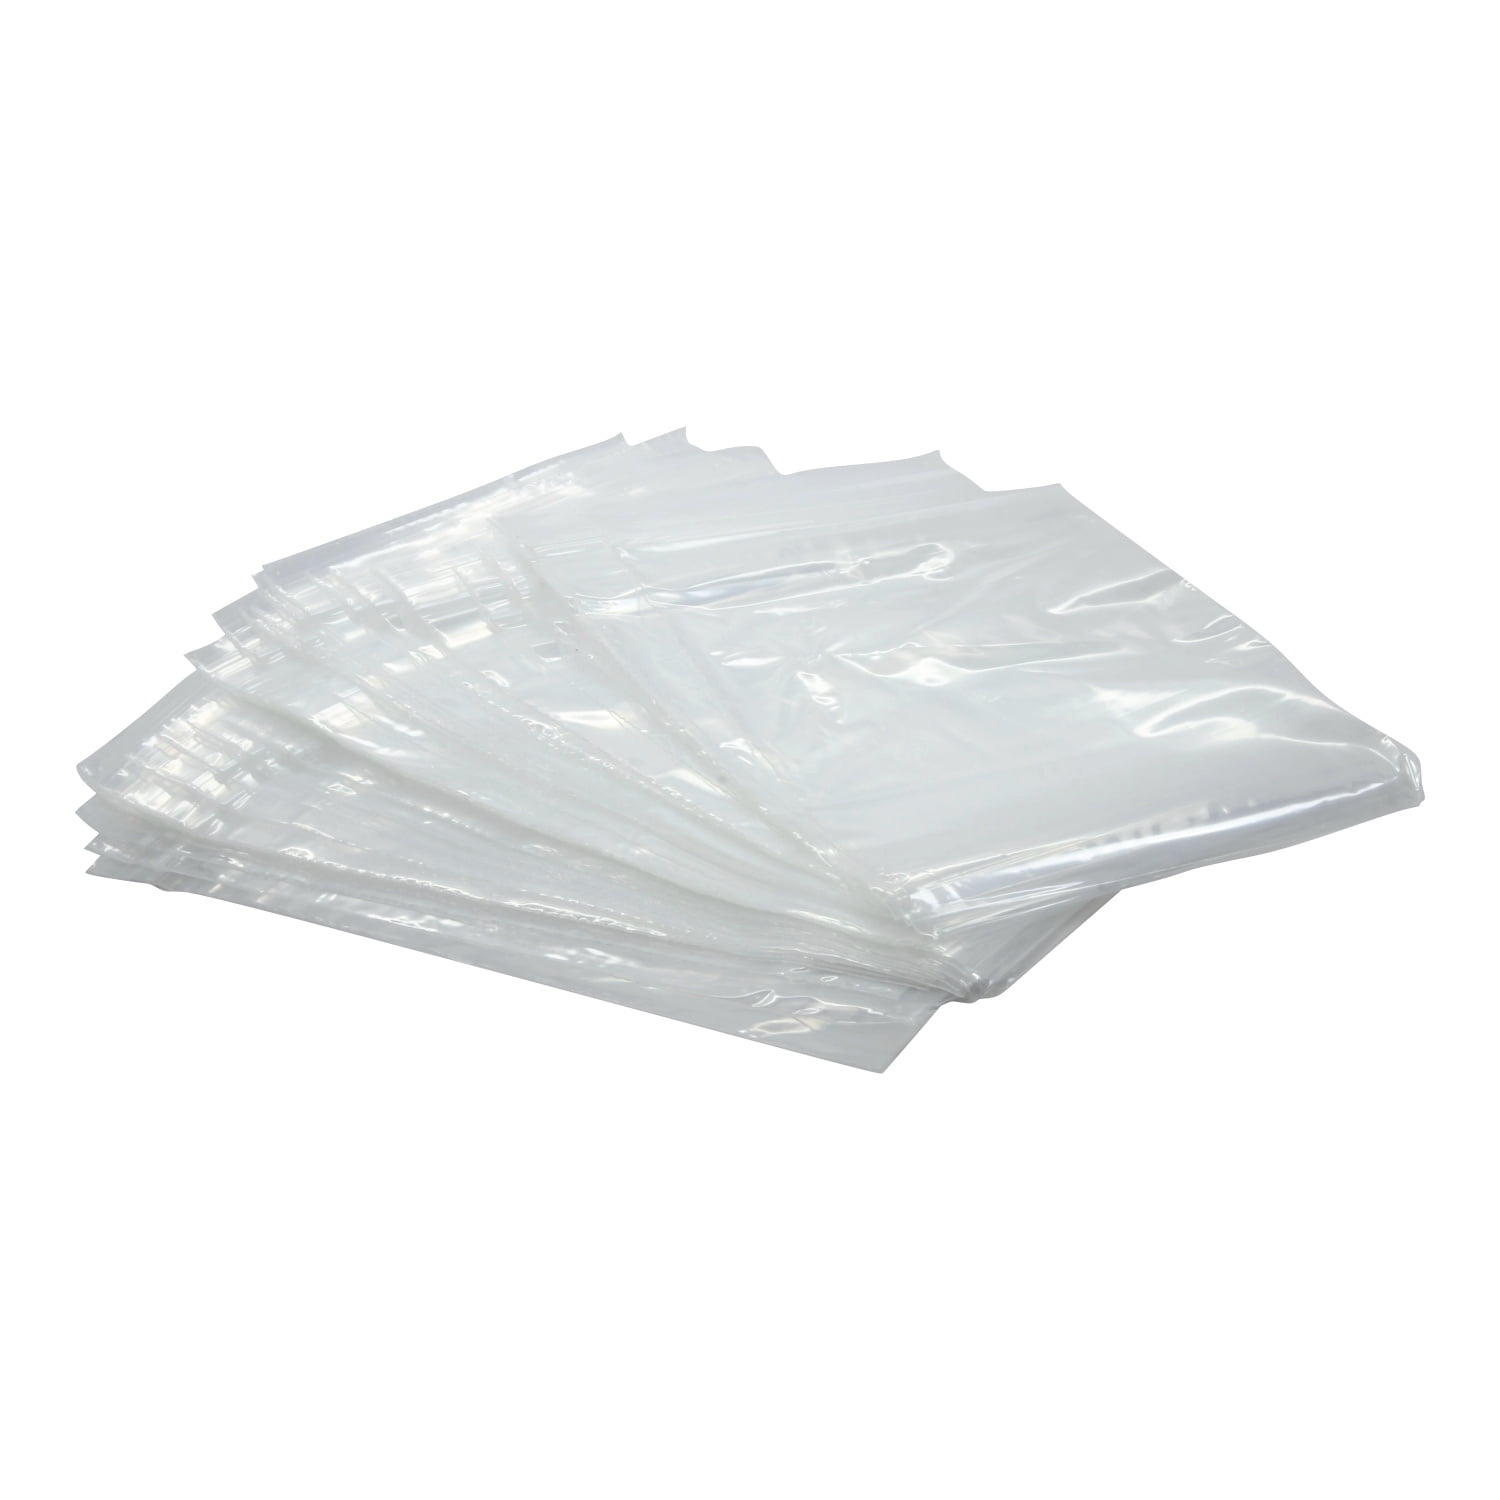 5"x8" 2000 Writeable White Block 2 Mil Clear Reclosable Bag Water-Resistant